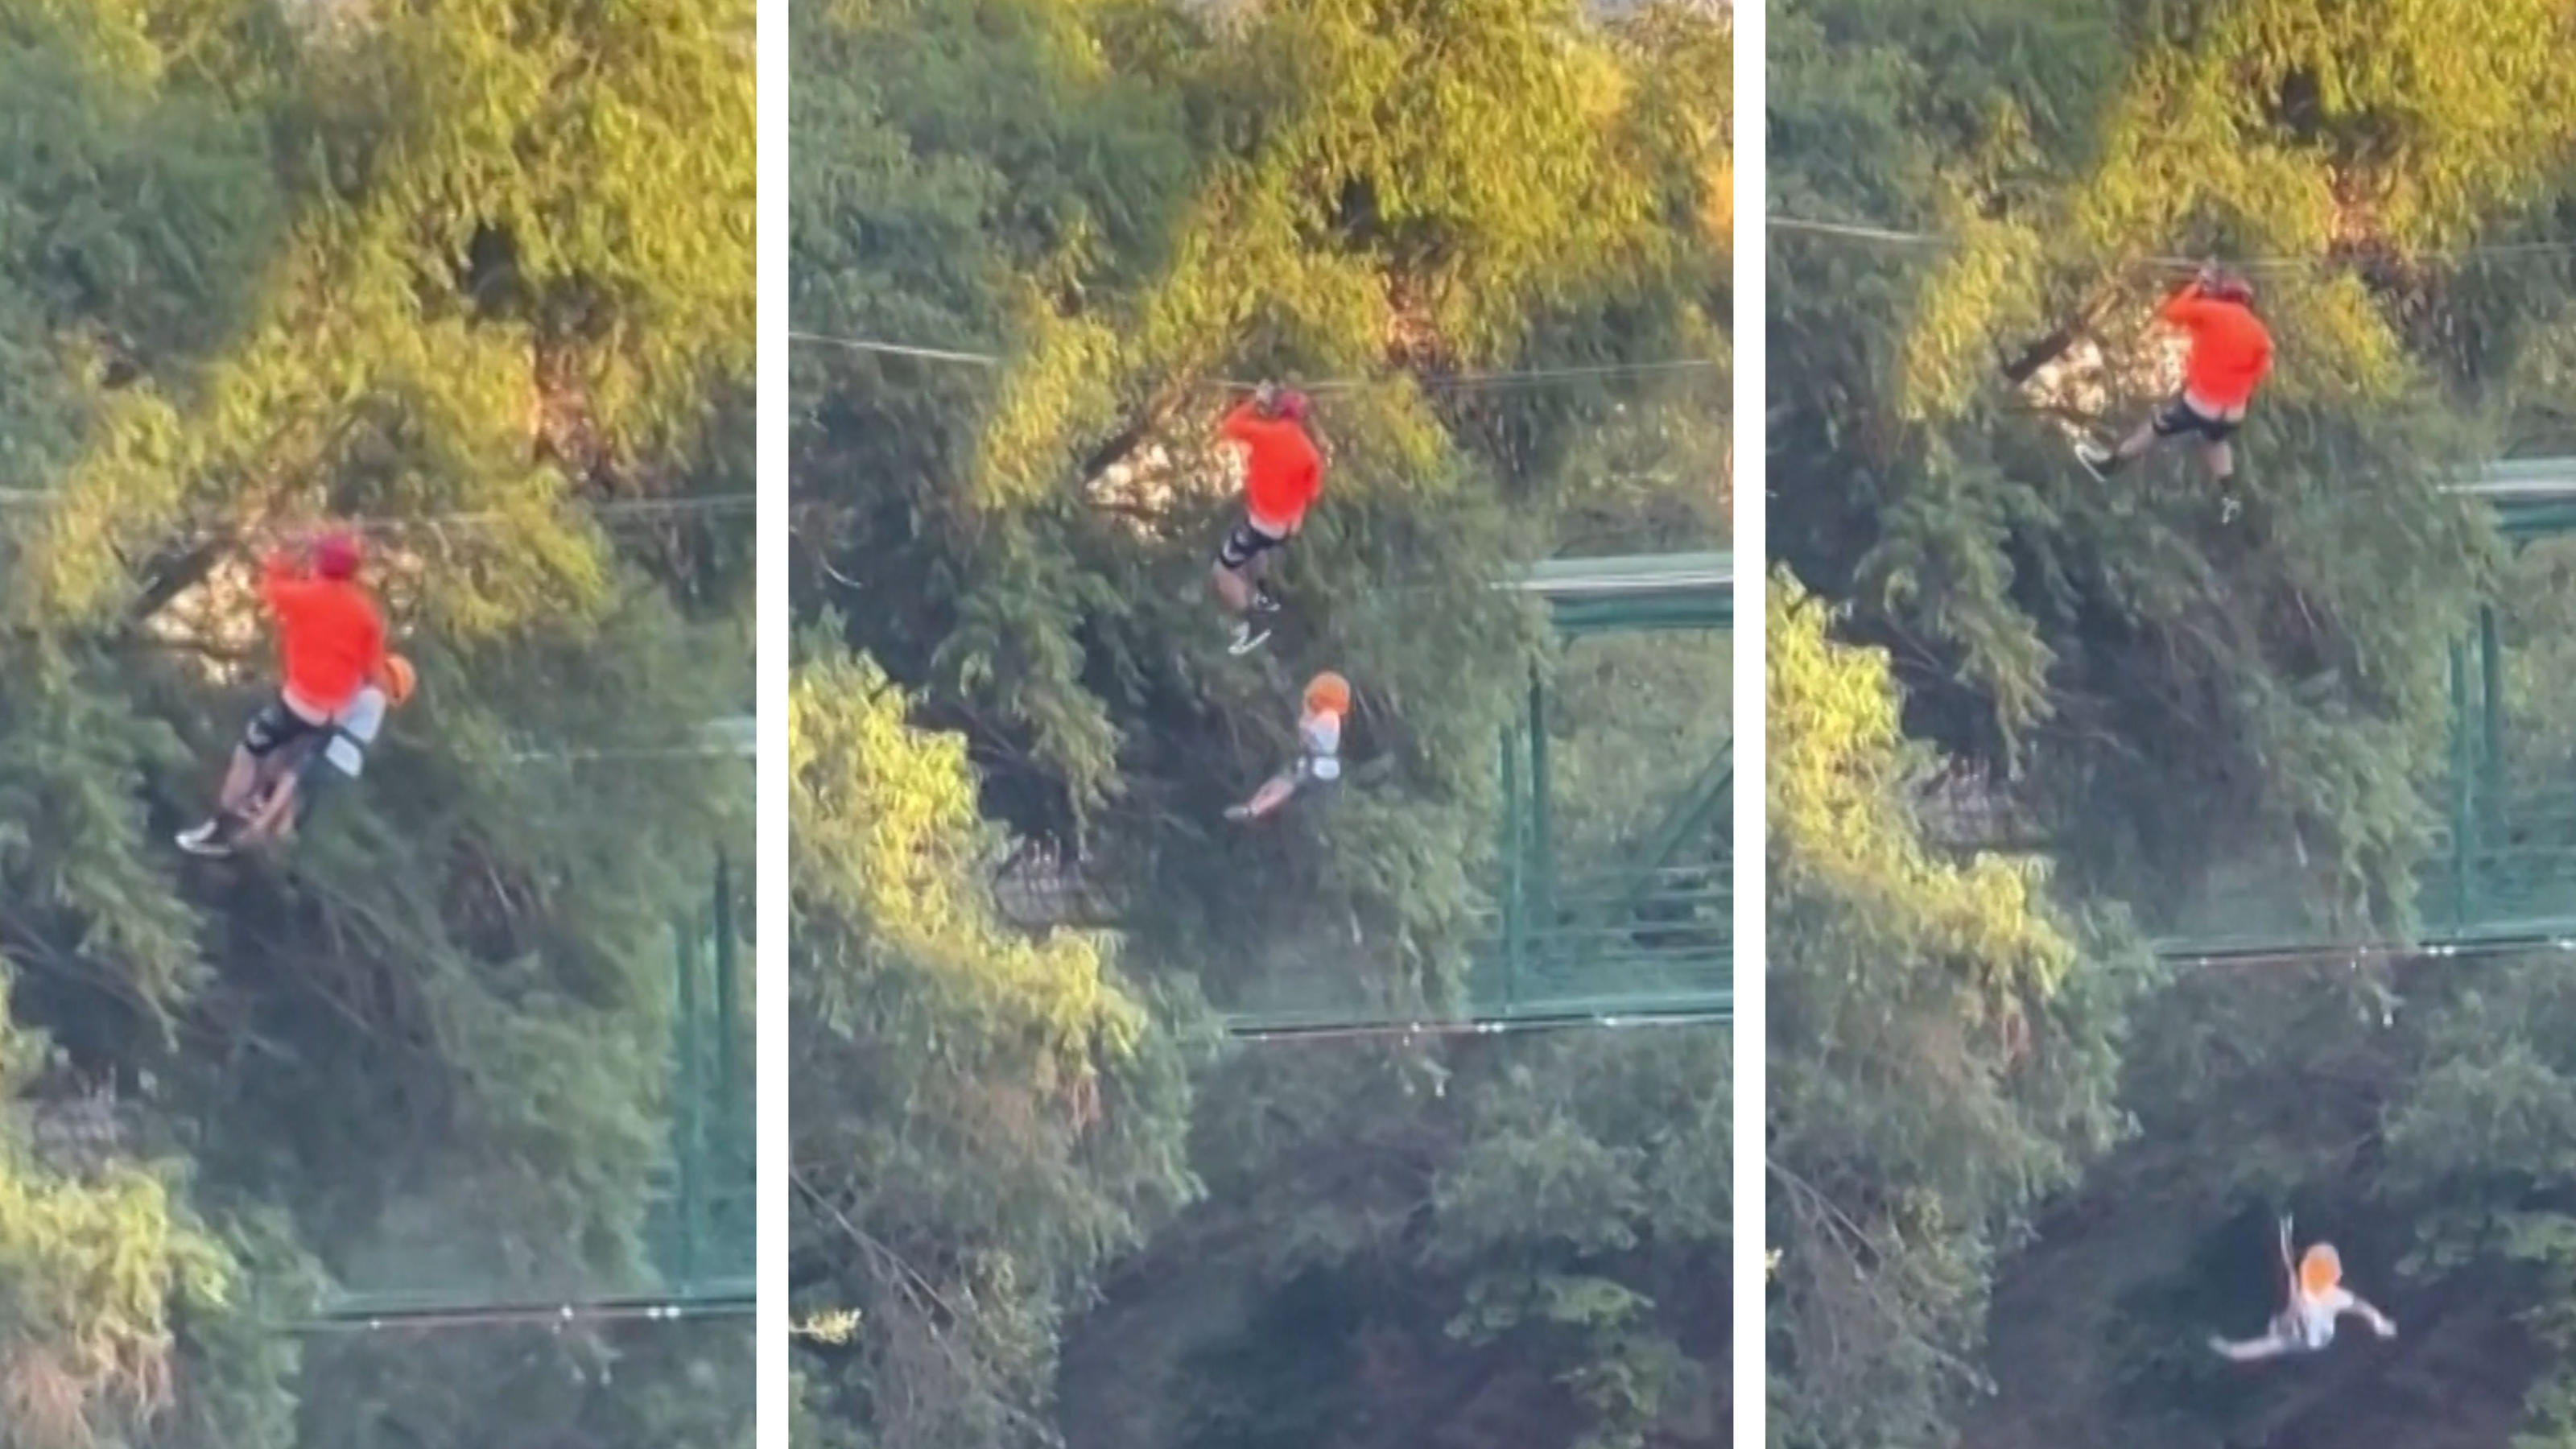 A boy (6 years old) falls from a horror zipline in an amusement park